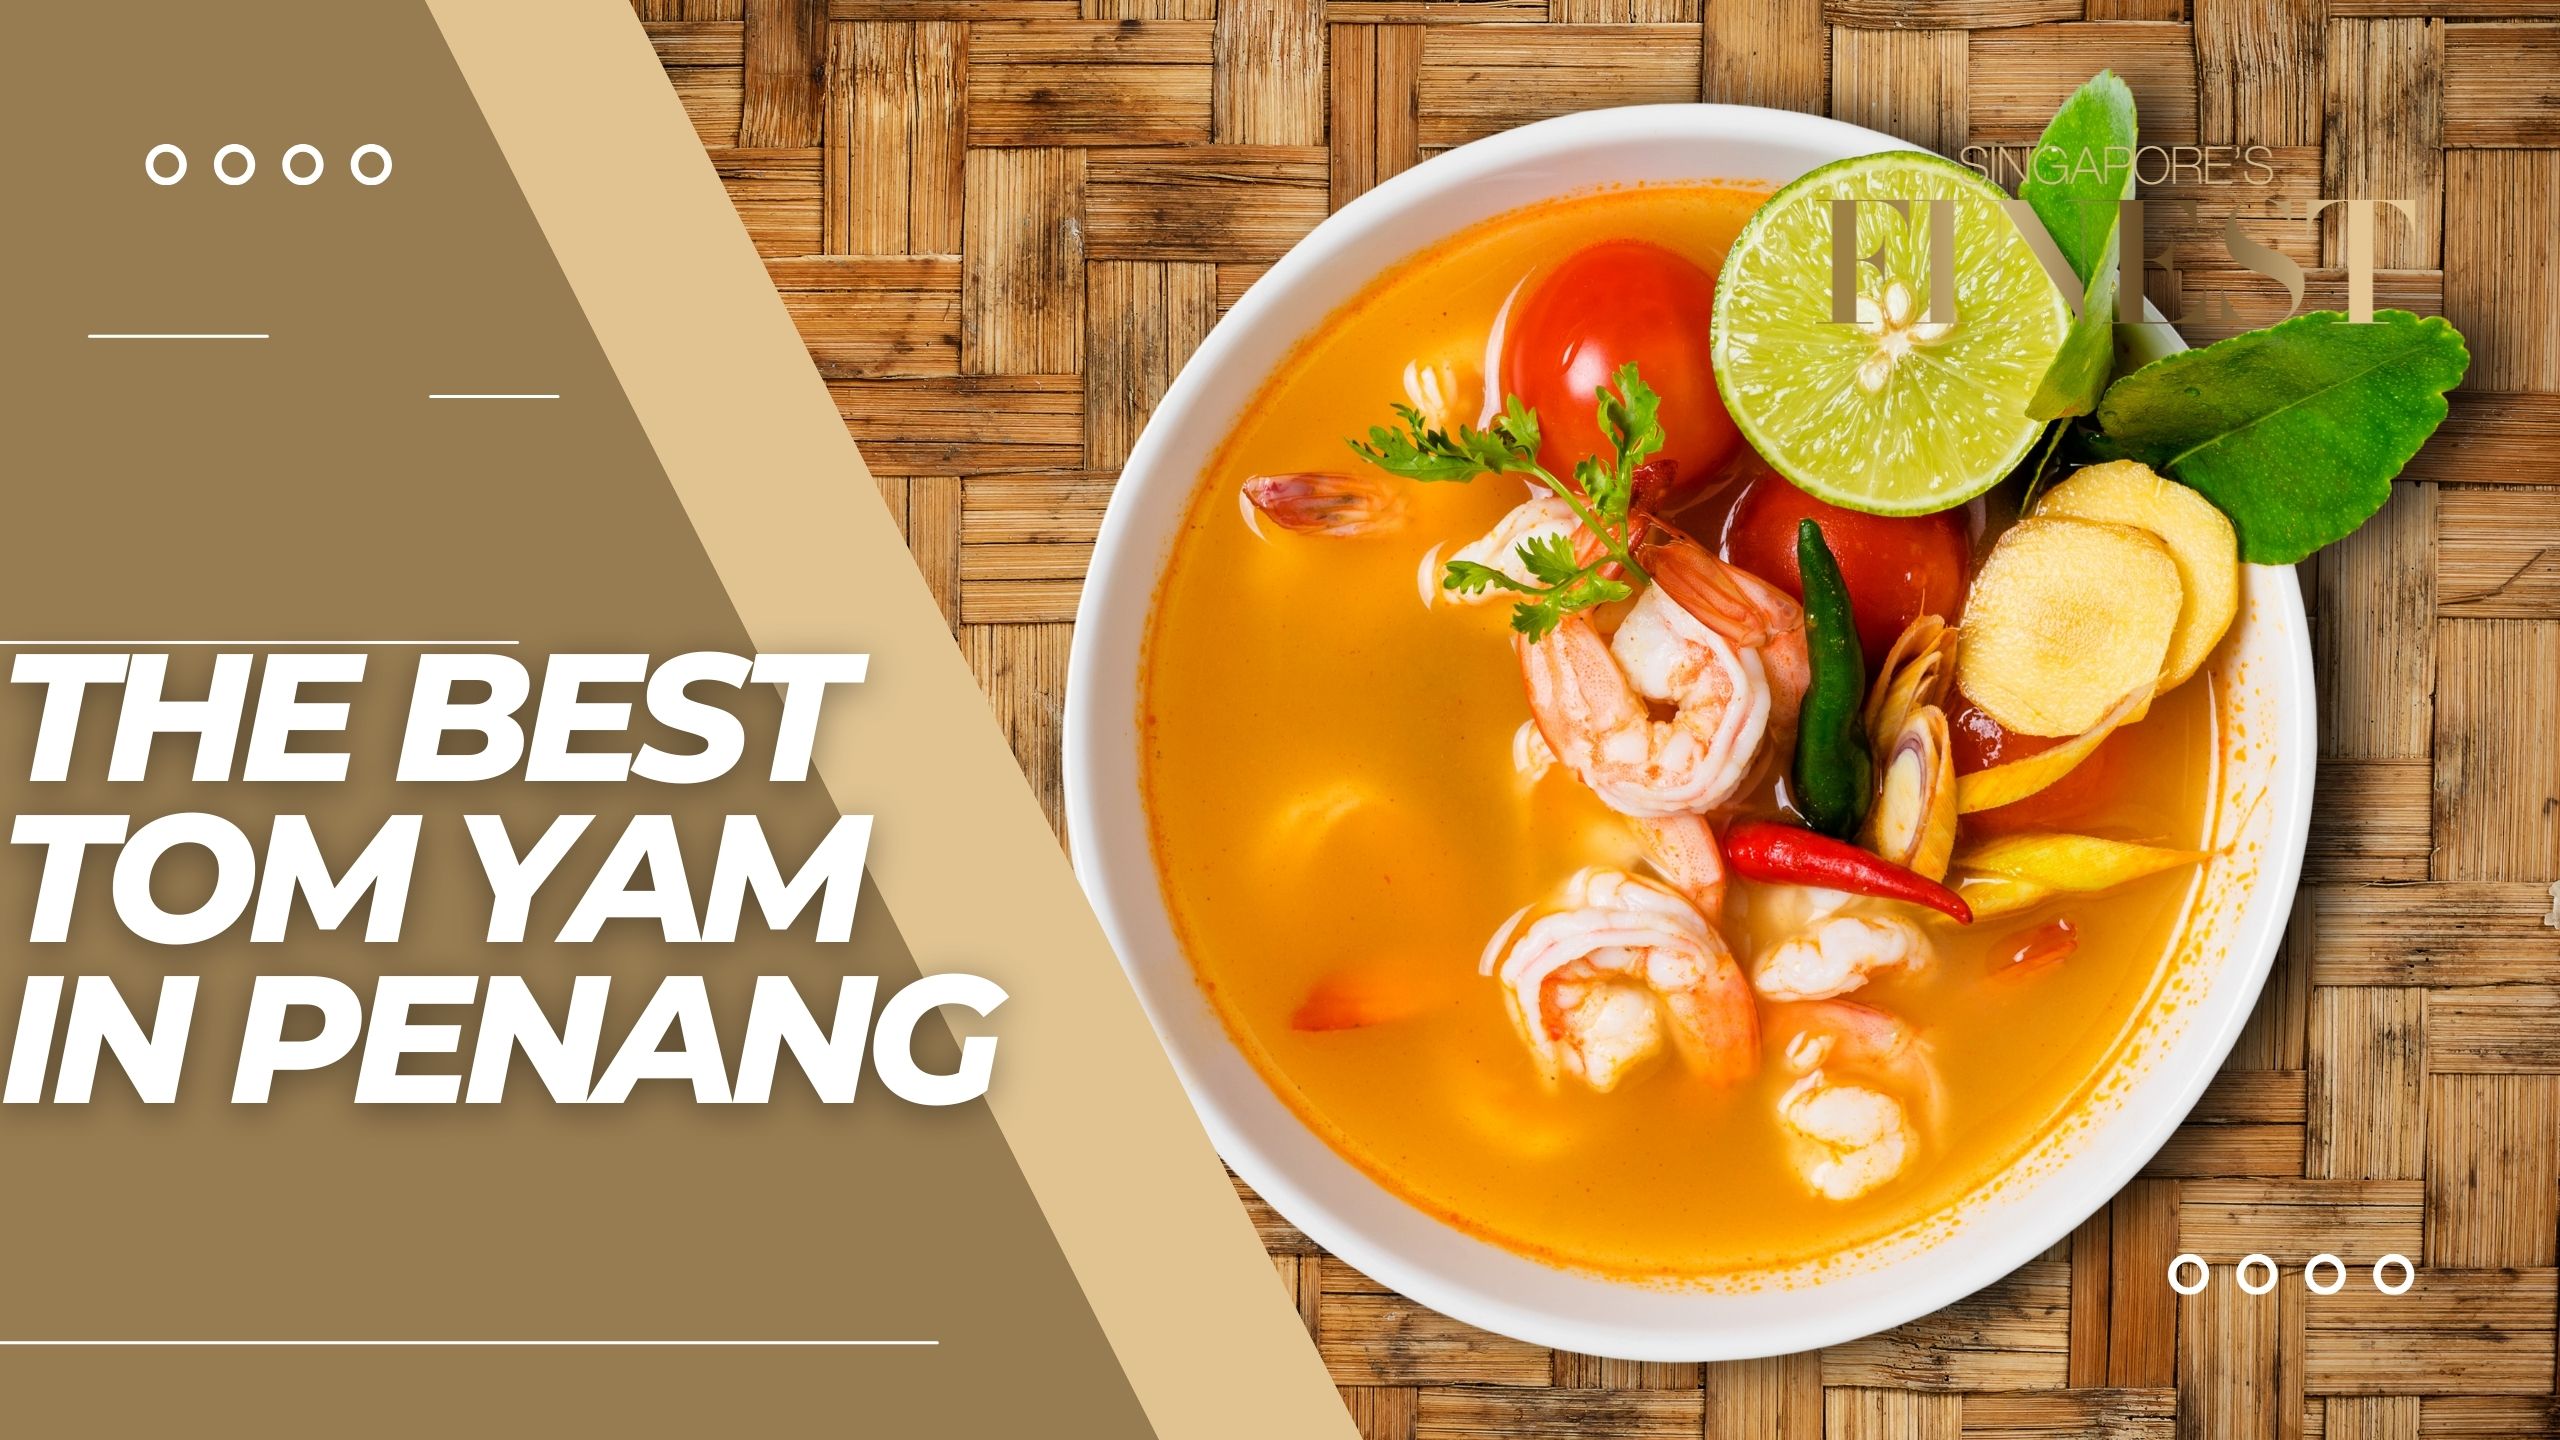 The Finest Tom Yam in Penang